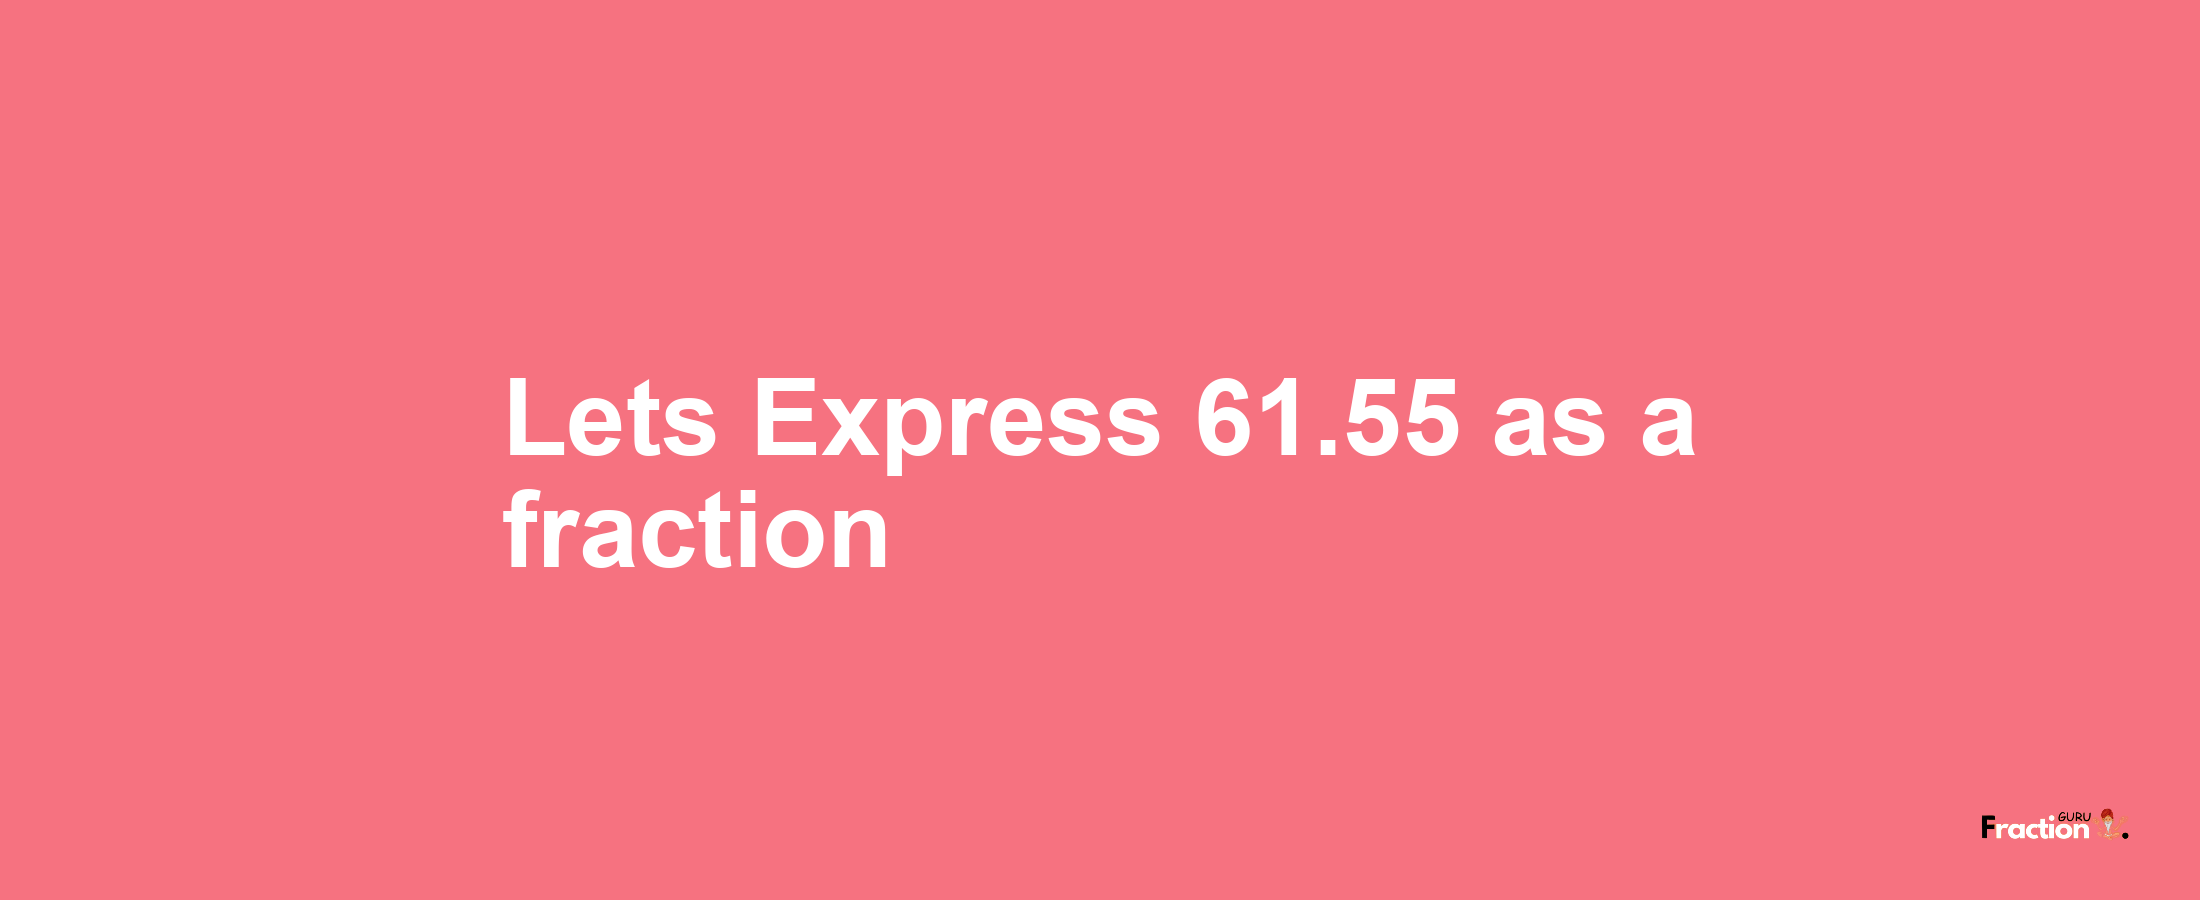 Lets Express 61.55 as afraction